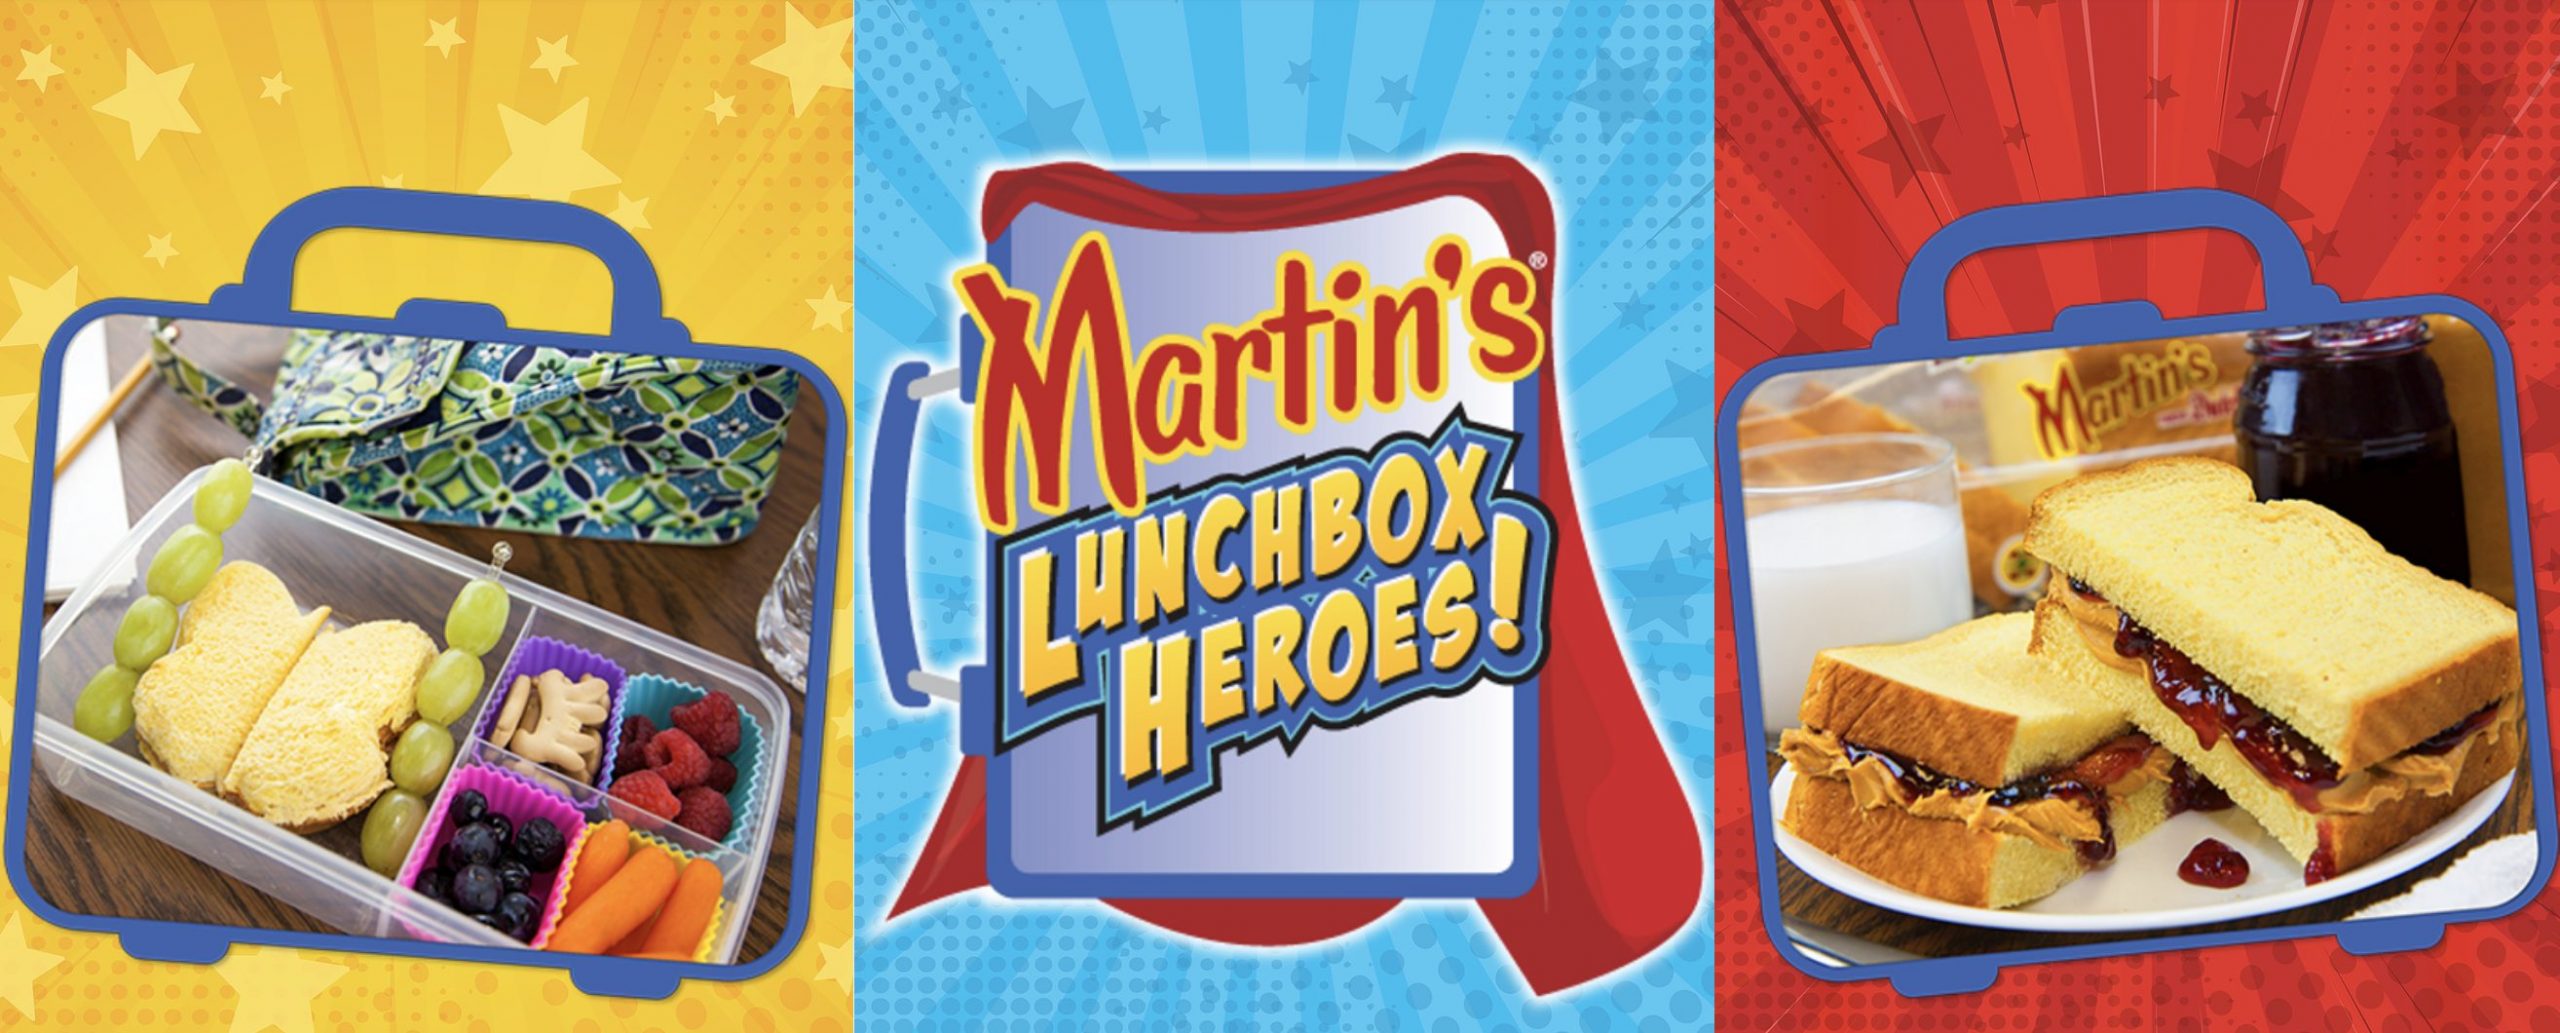 Martin’s Lunchbox Heroes charity campaign supports Blessings in a Backpack